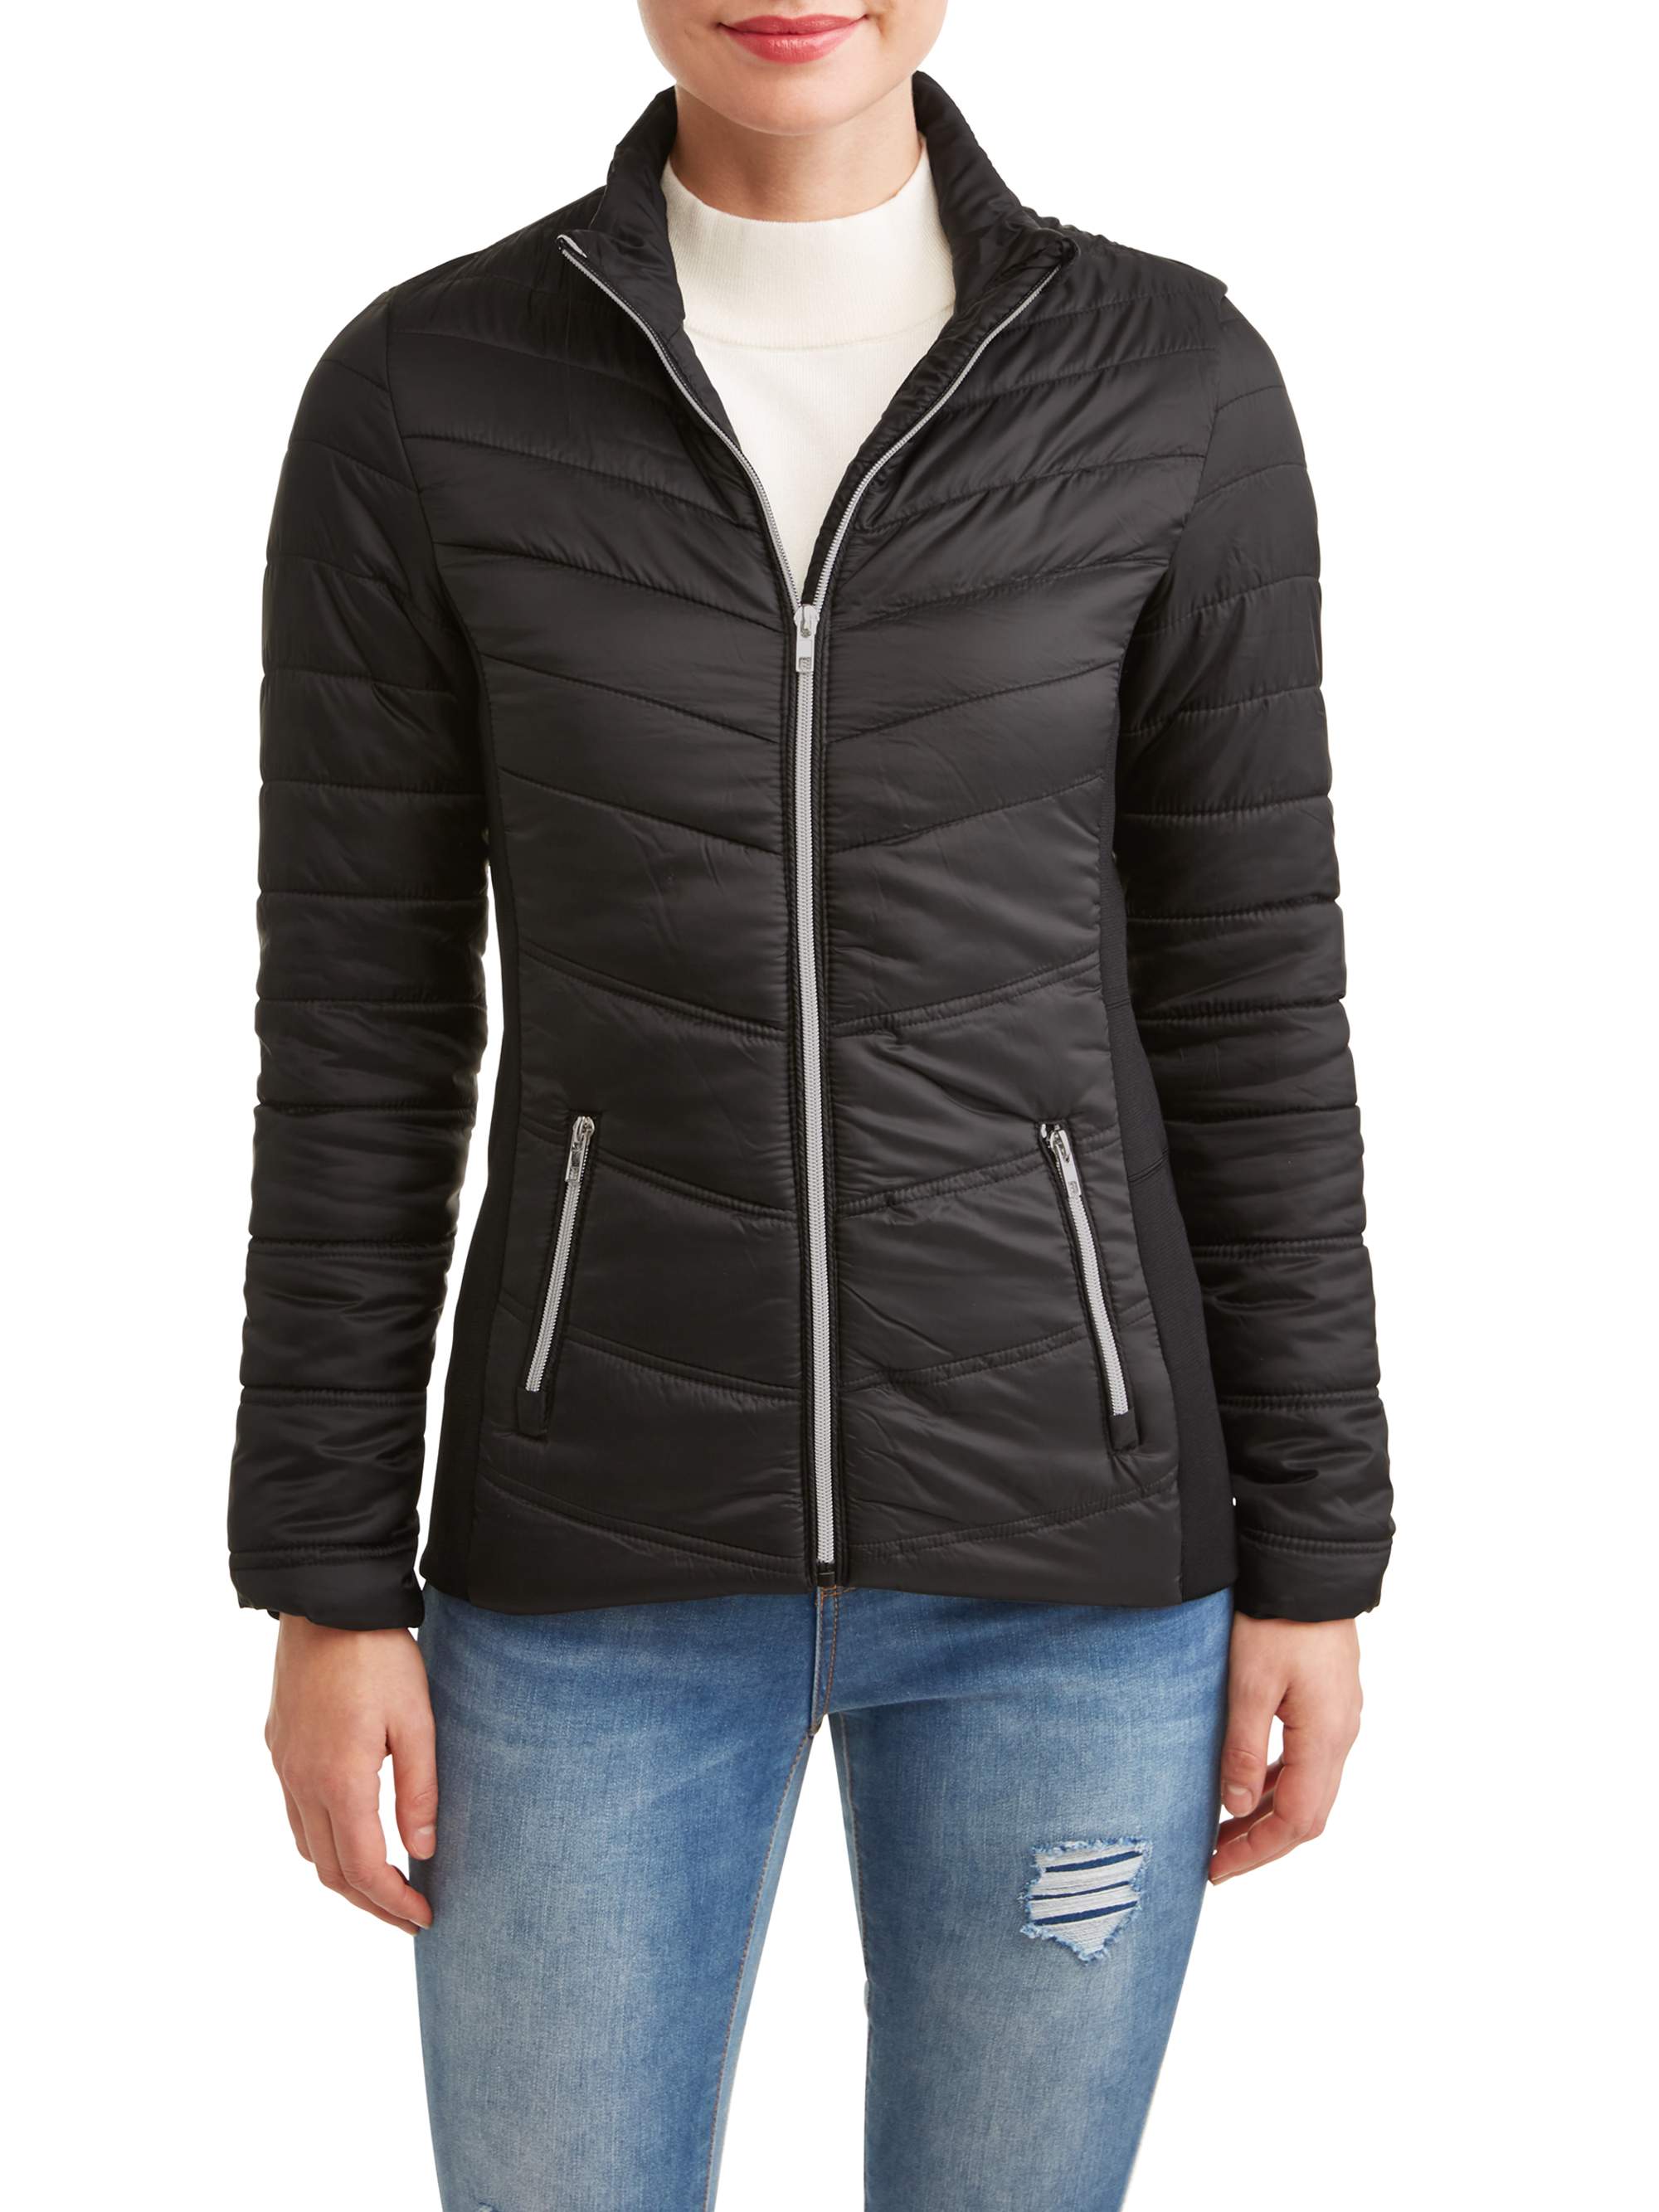 Women's Active Quilted Puffer Jacket - image 1 of 4